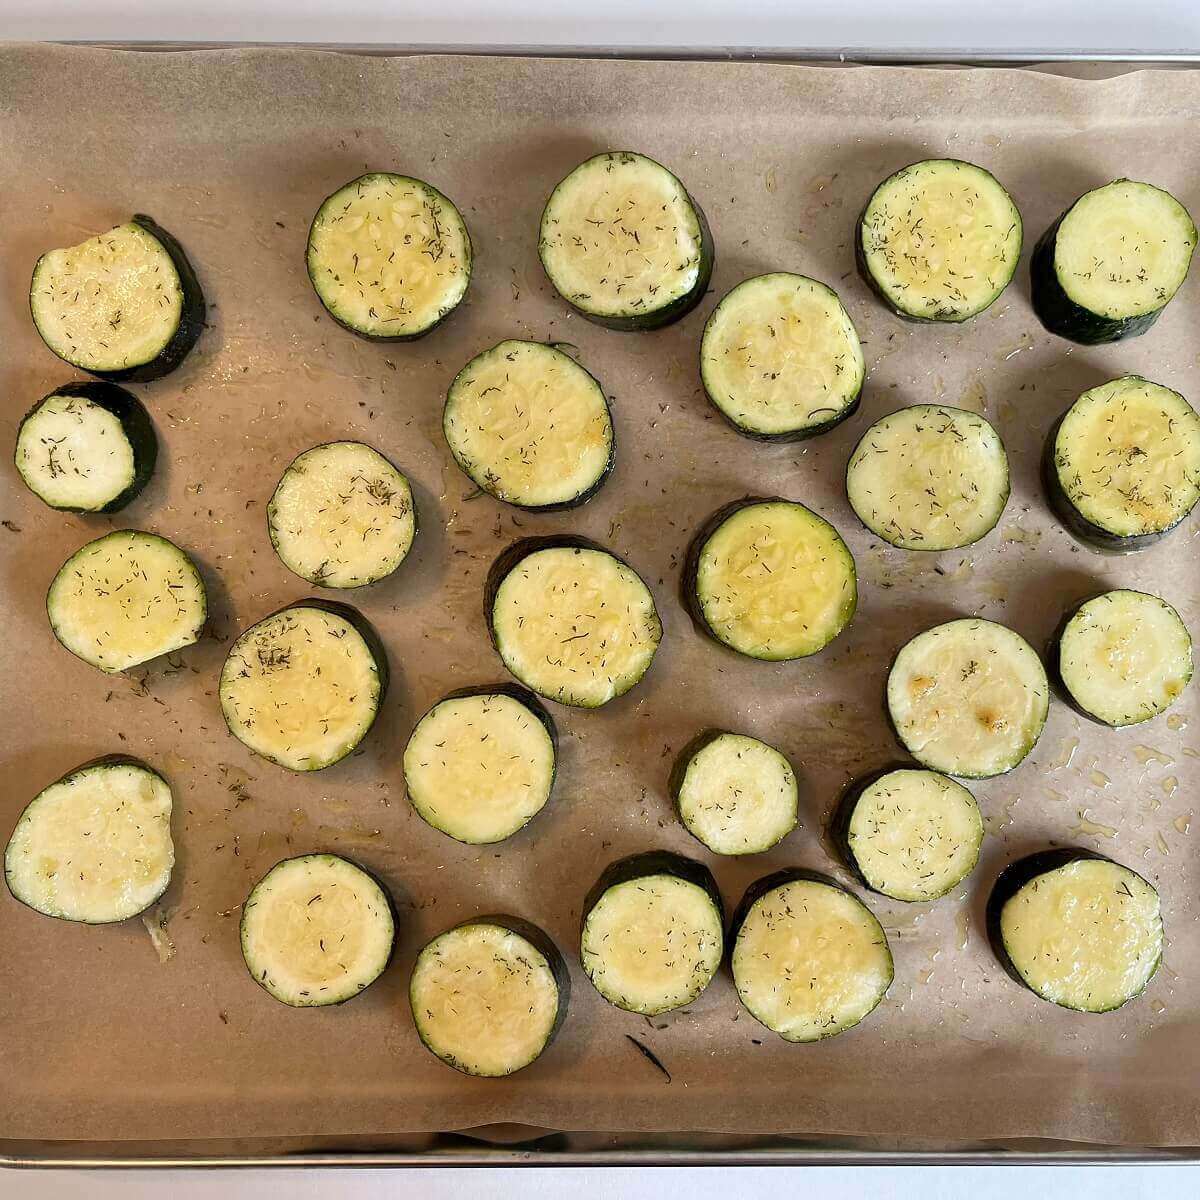 Raw zucchini round slices on a sheet pan lined with parchment paper.